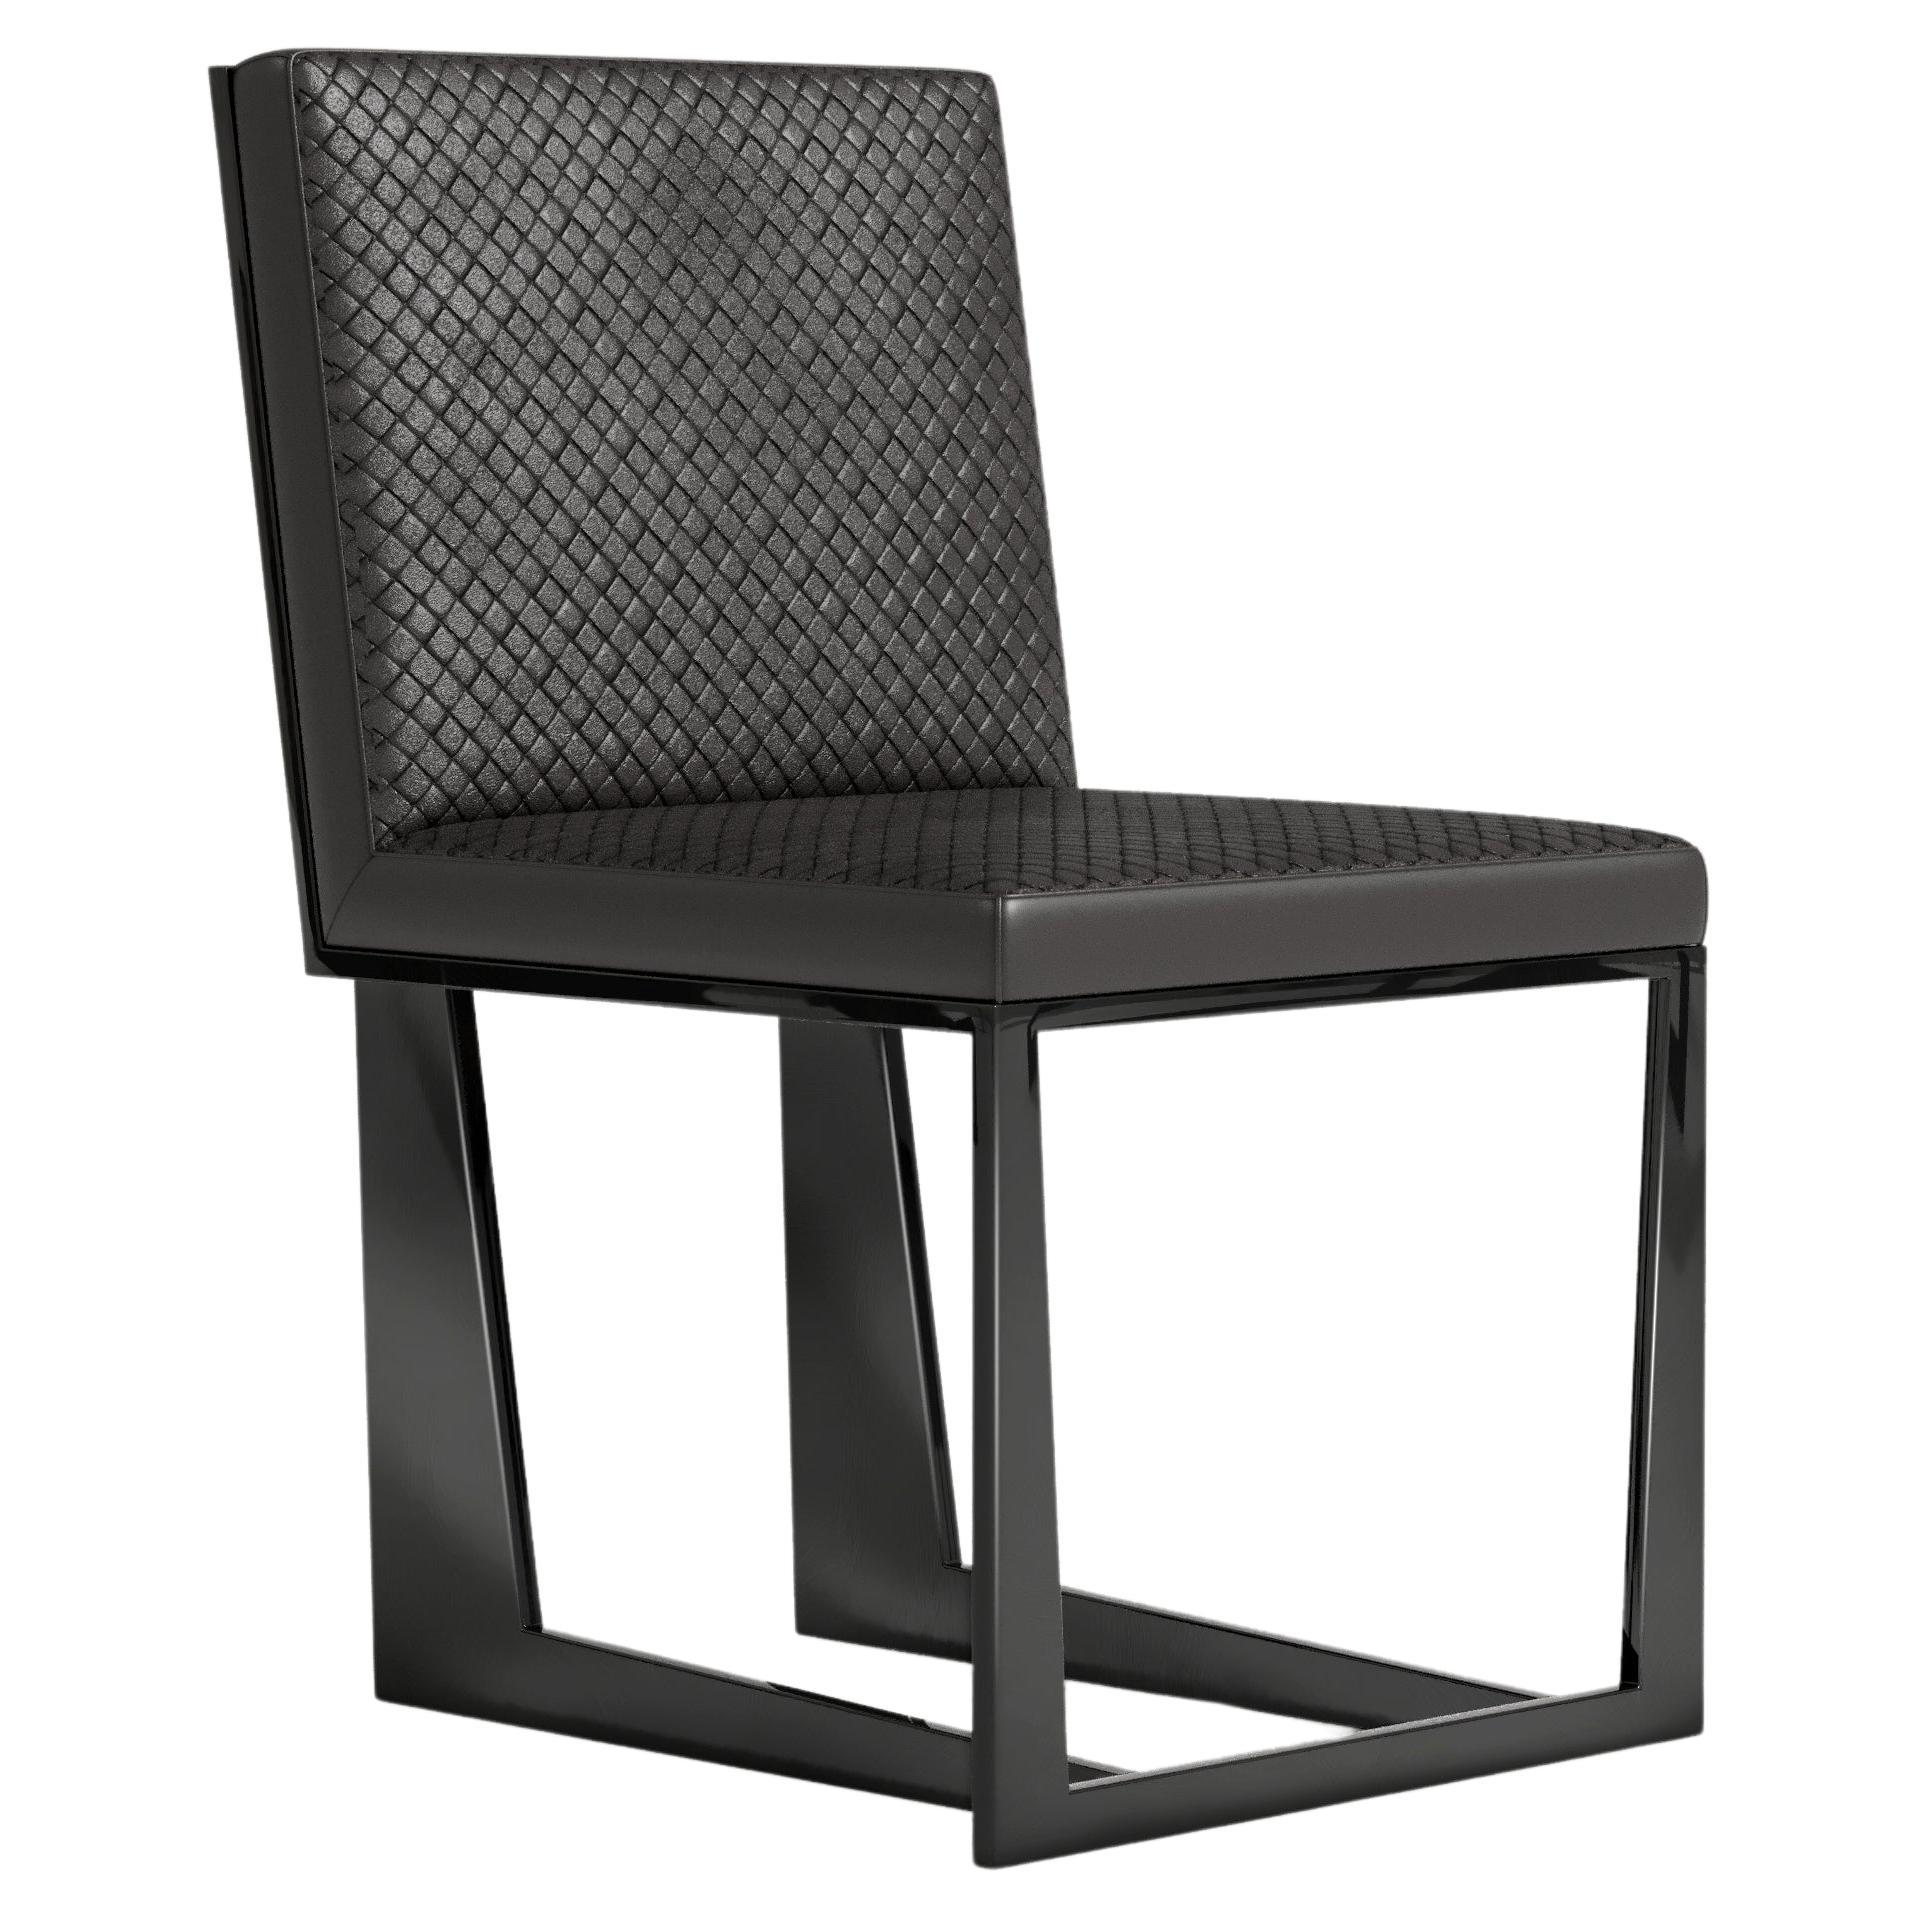 Affilato Chair in Black Lacquer and Bottega Leather by Palena Furniture For Sale